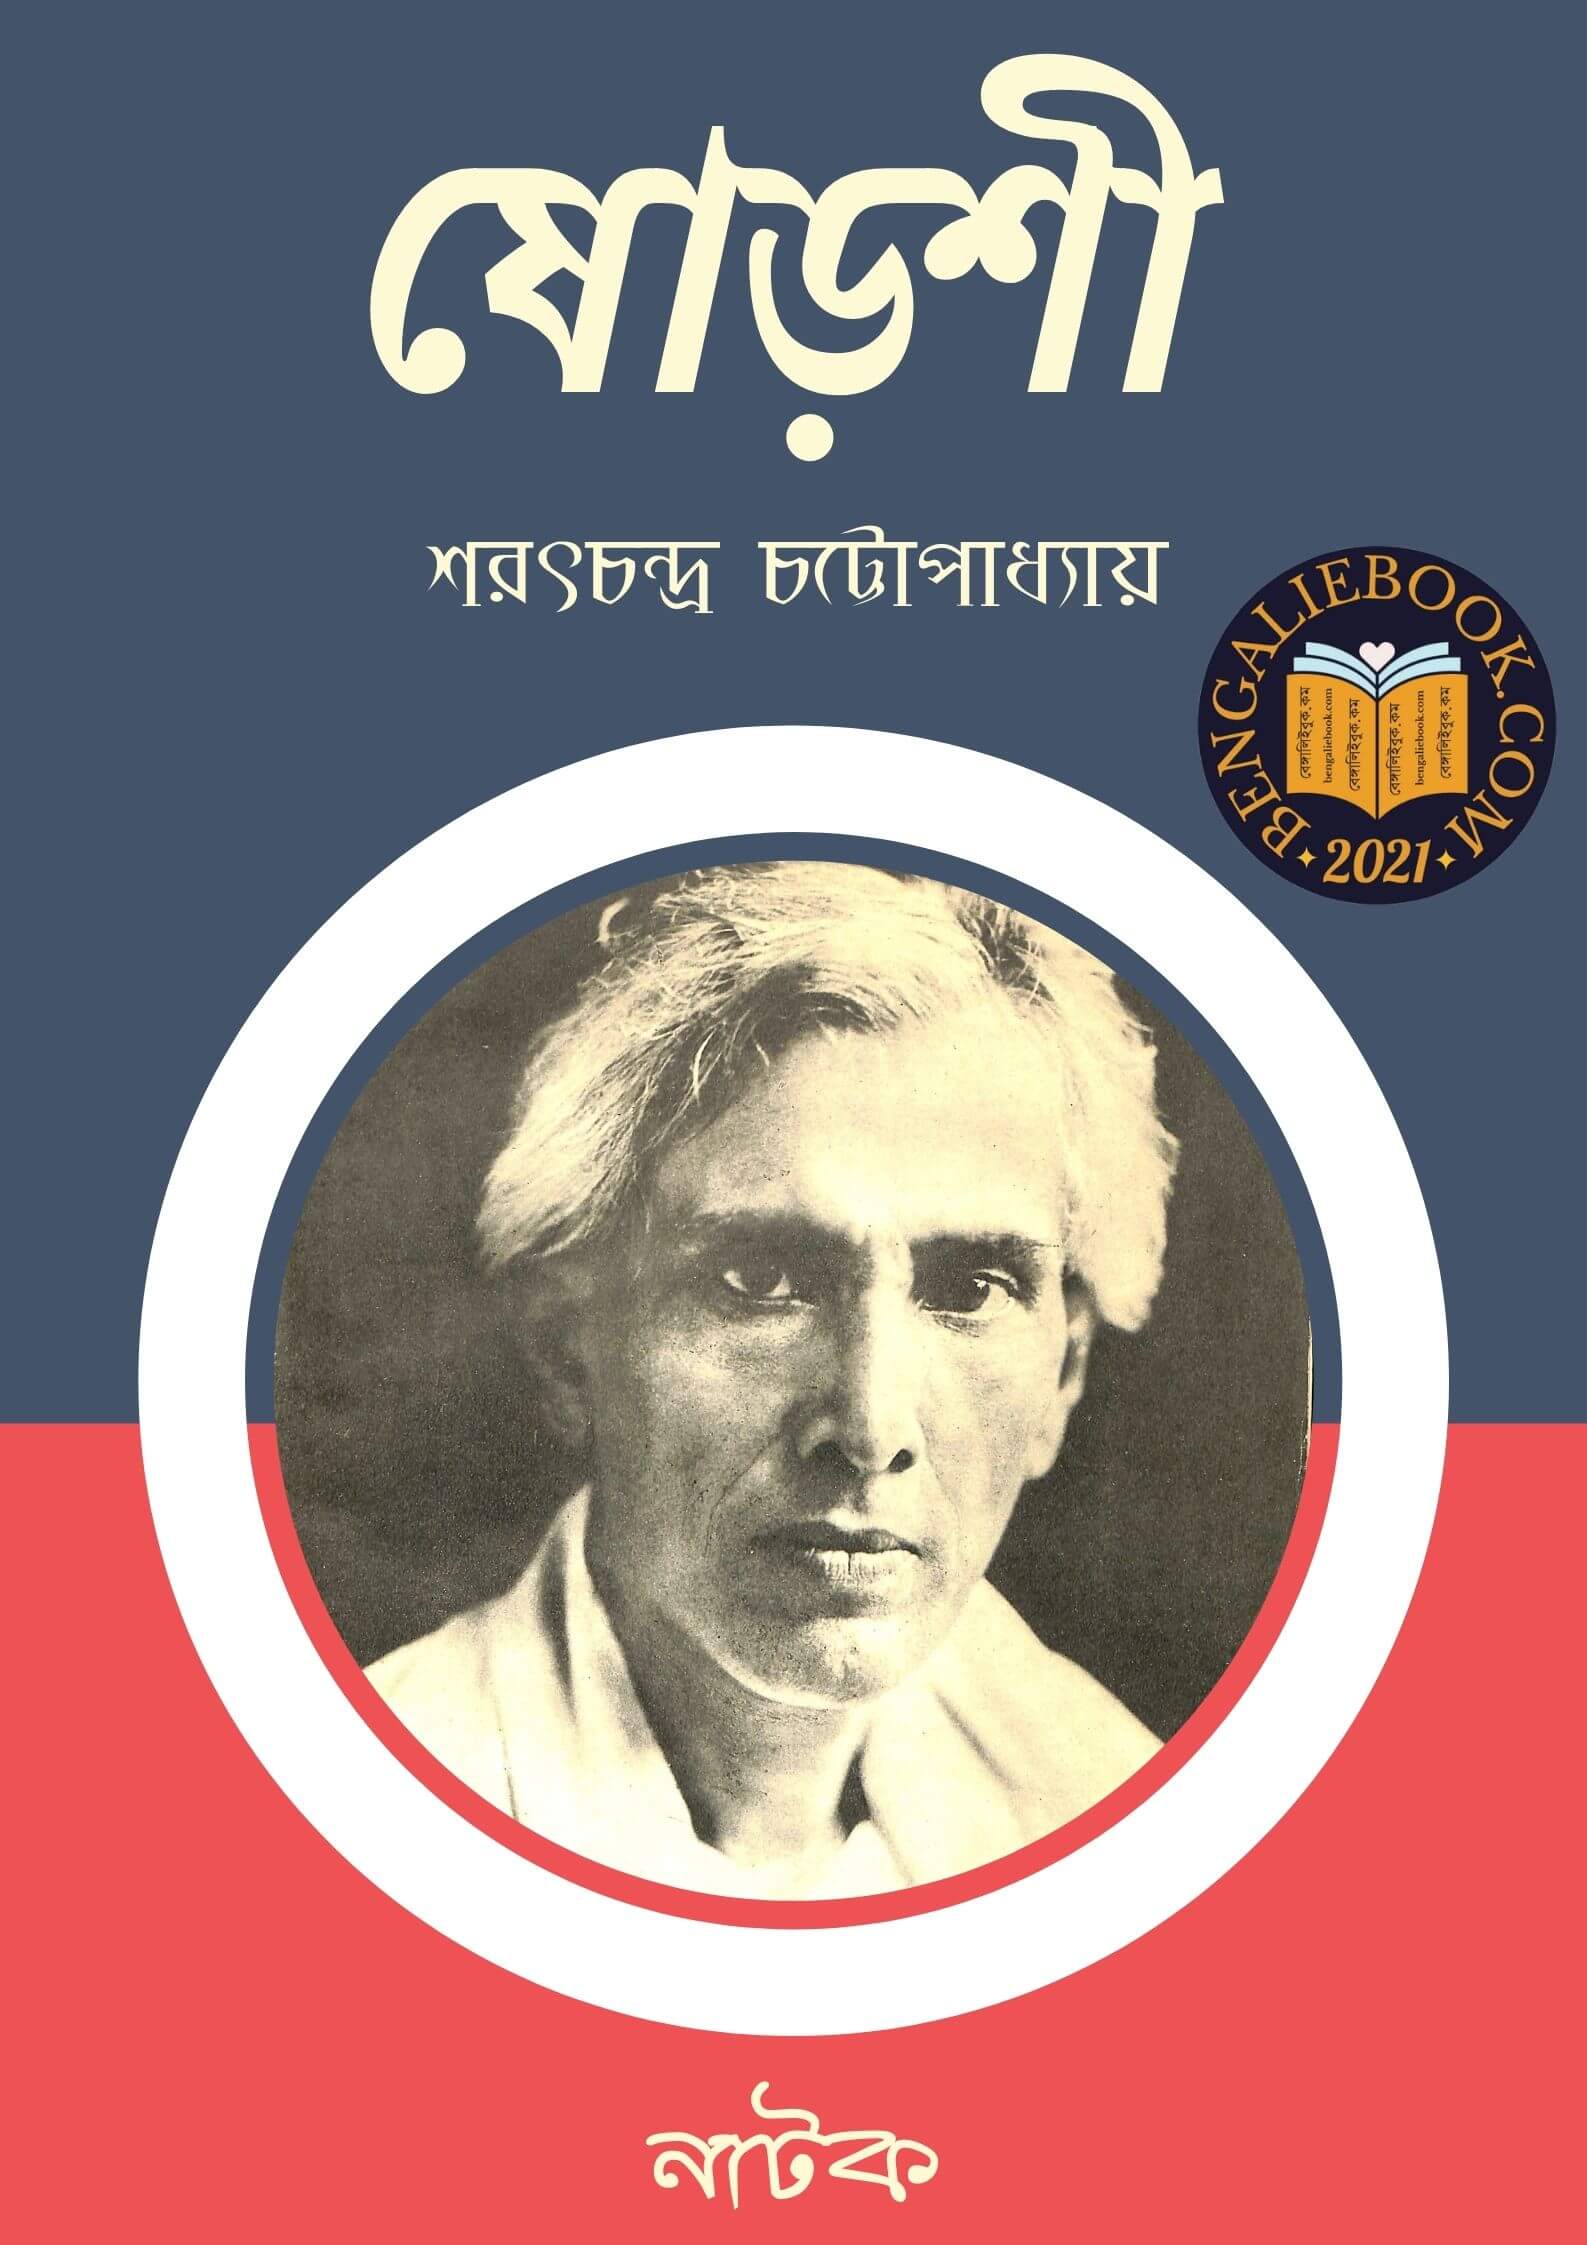 Read more about the article ষোড়শী-শরৎচন্দ্র চট্টোপাধ্যায় ( Shoroshi by Sarat Chandra Chattopadhyay)